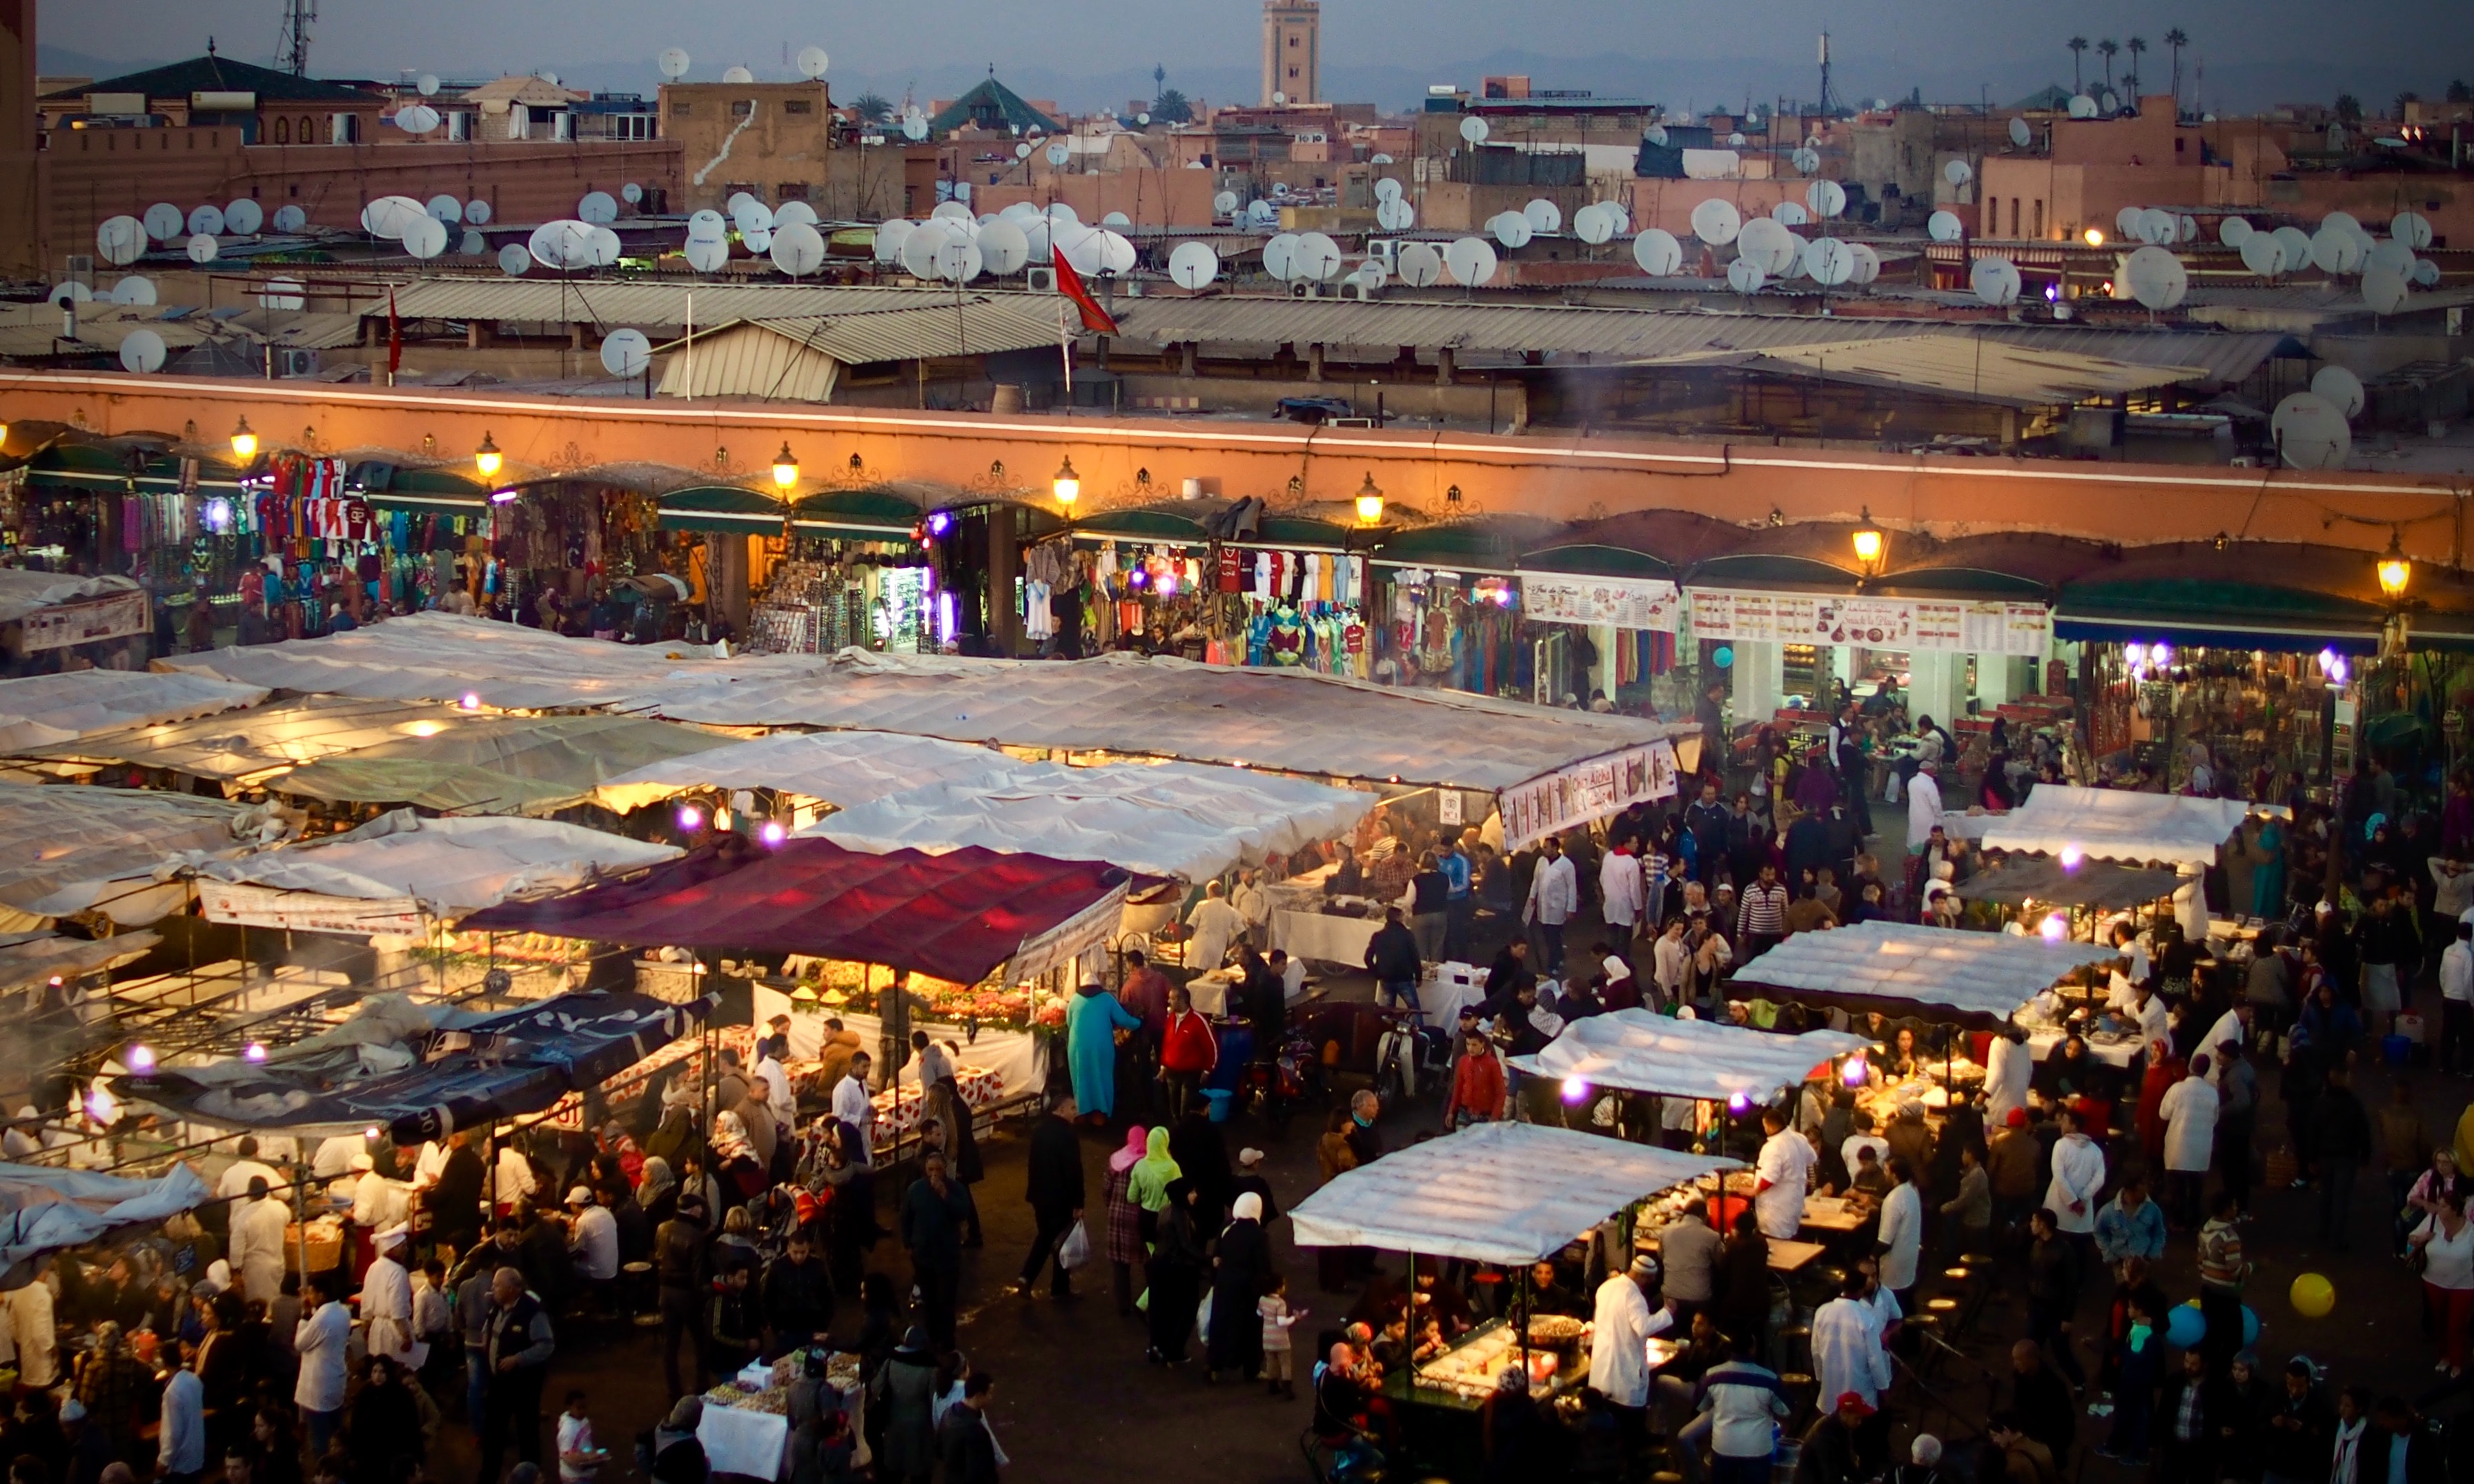 Overhead view of a busy outdoor market in the evening.